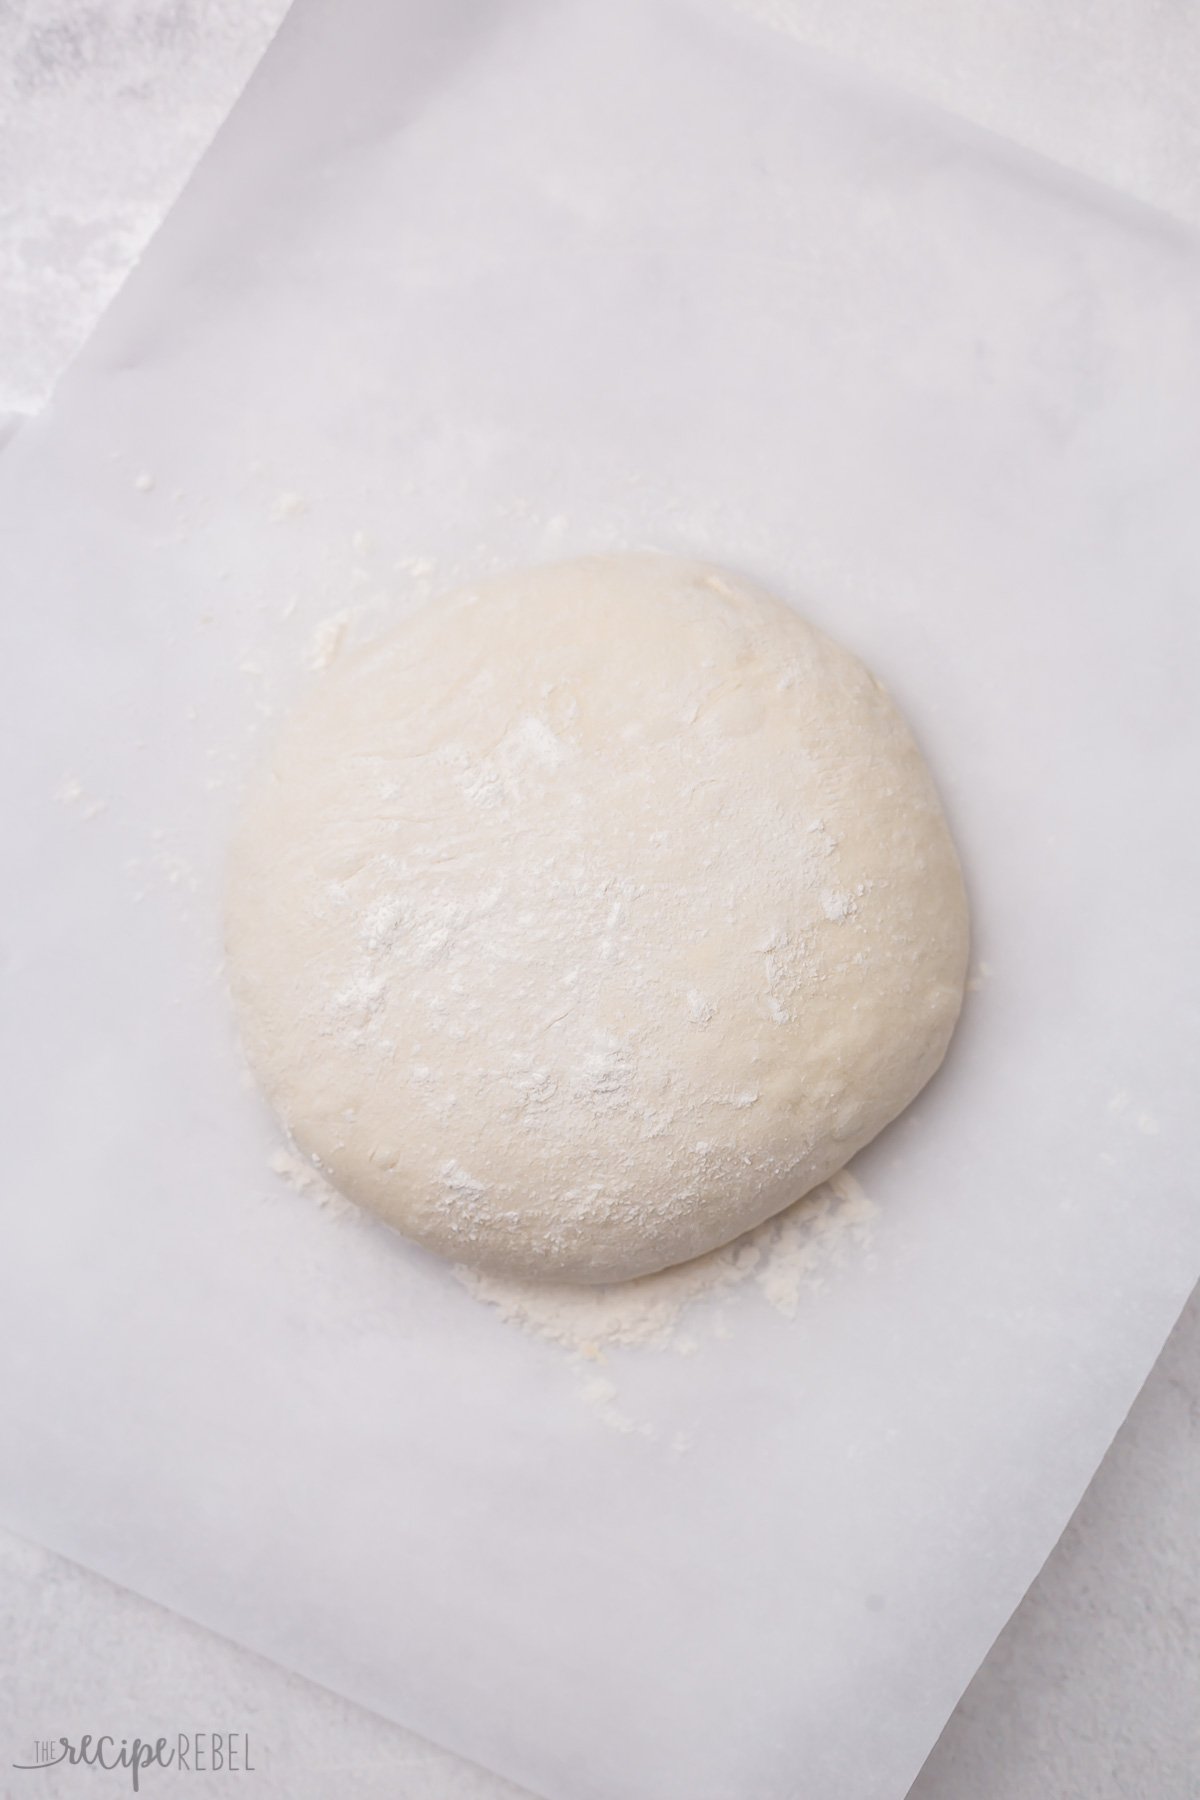 smooth ball of dough lying on a piece of parchment paper.